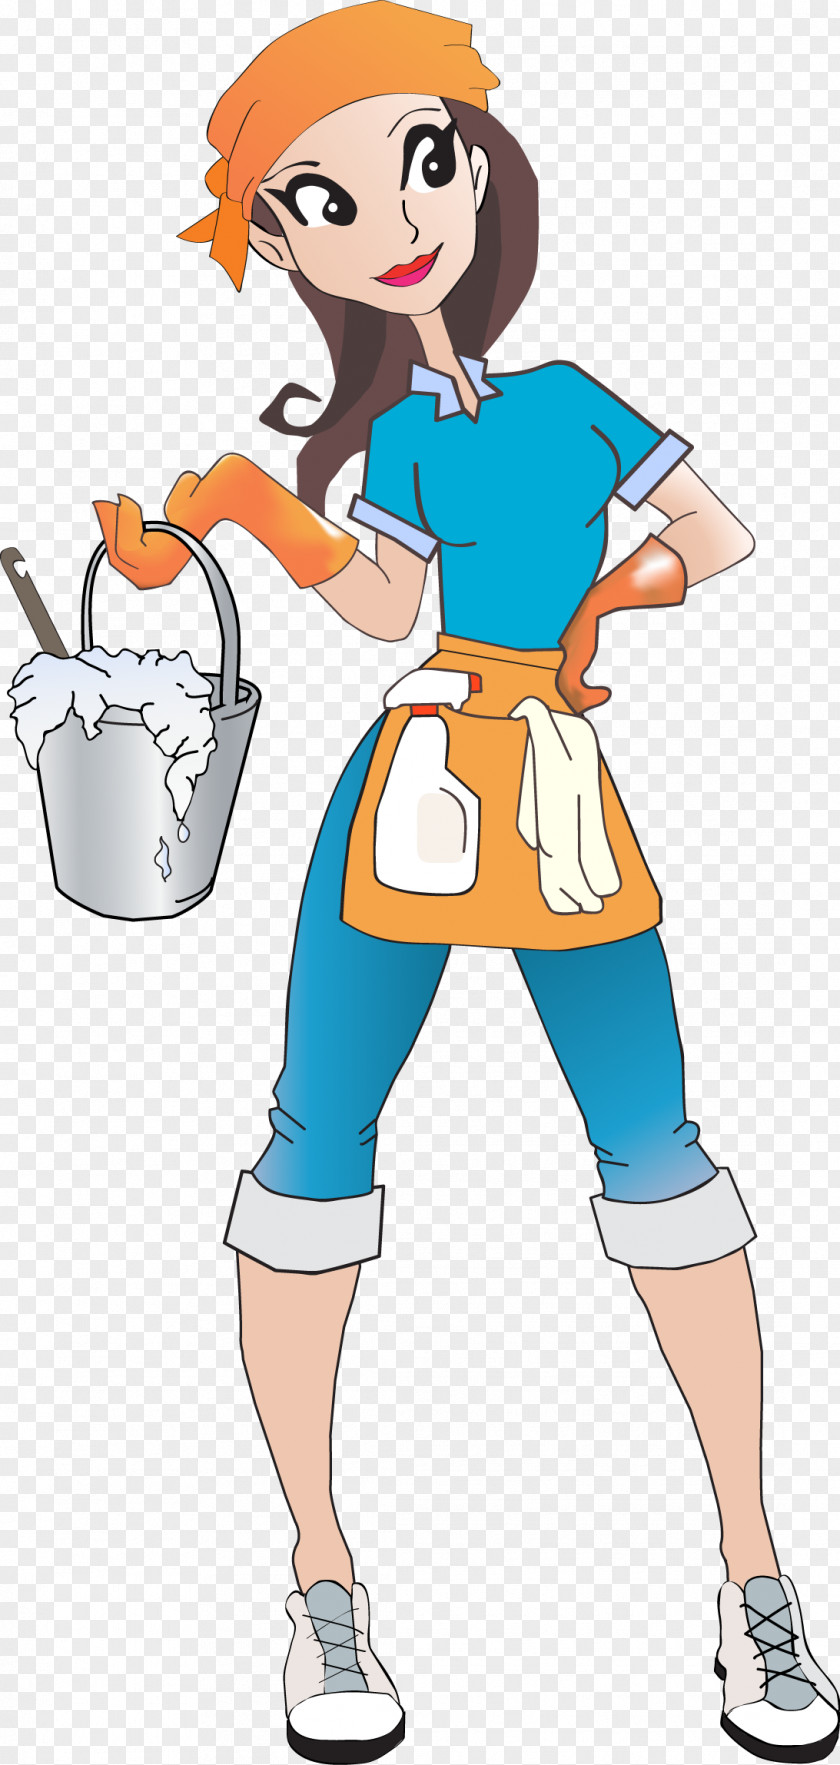 Maid Service Cleaner Cleaning Housekeeping PNG